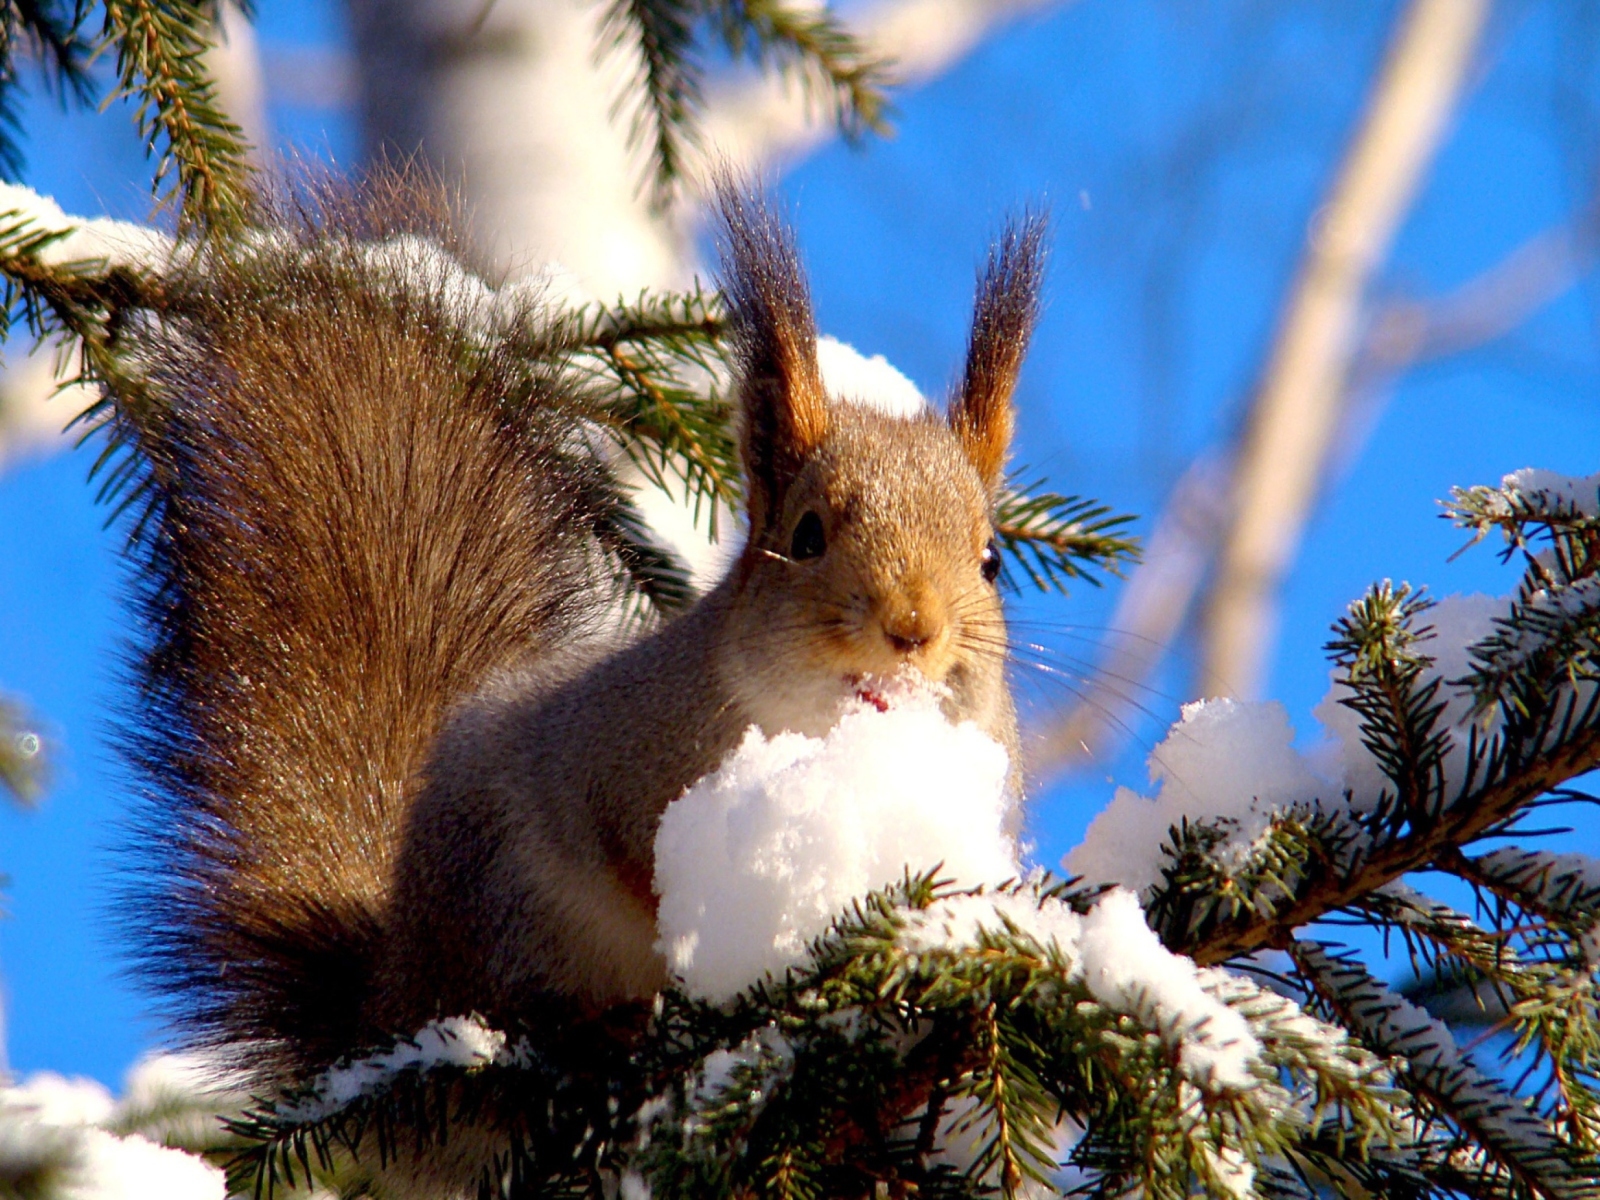 Squirrel Eating Snow wallpaper 1600x1200